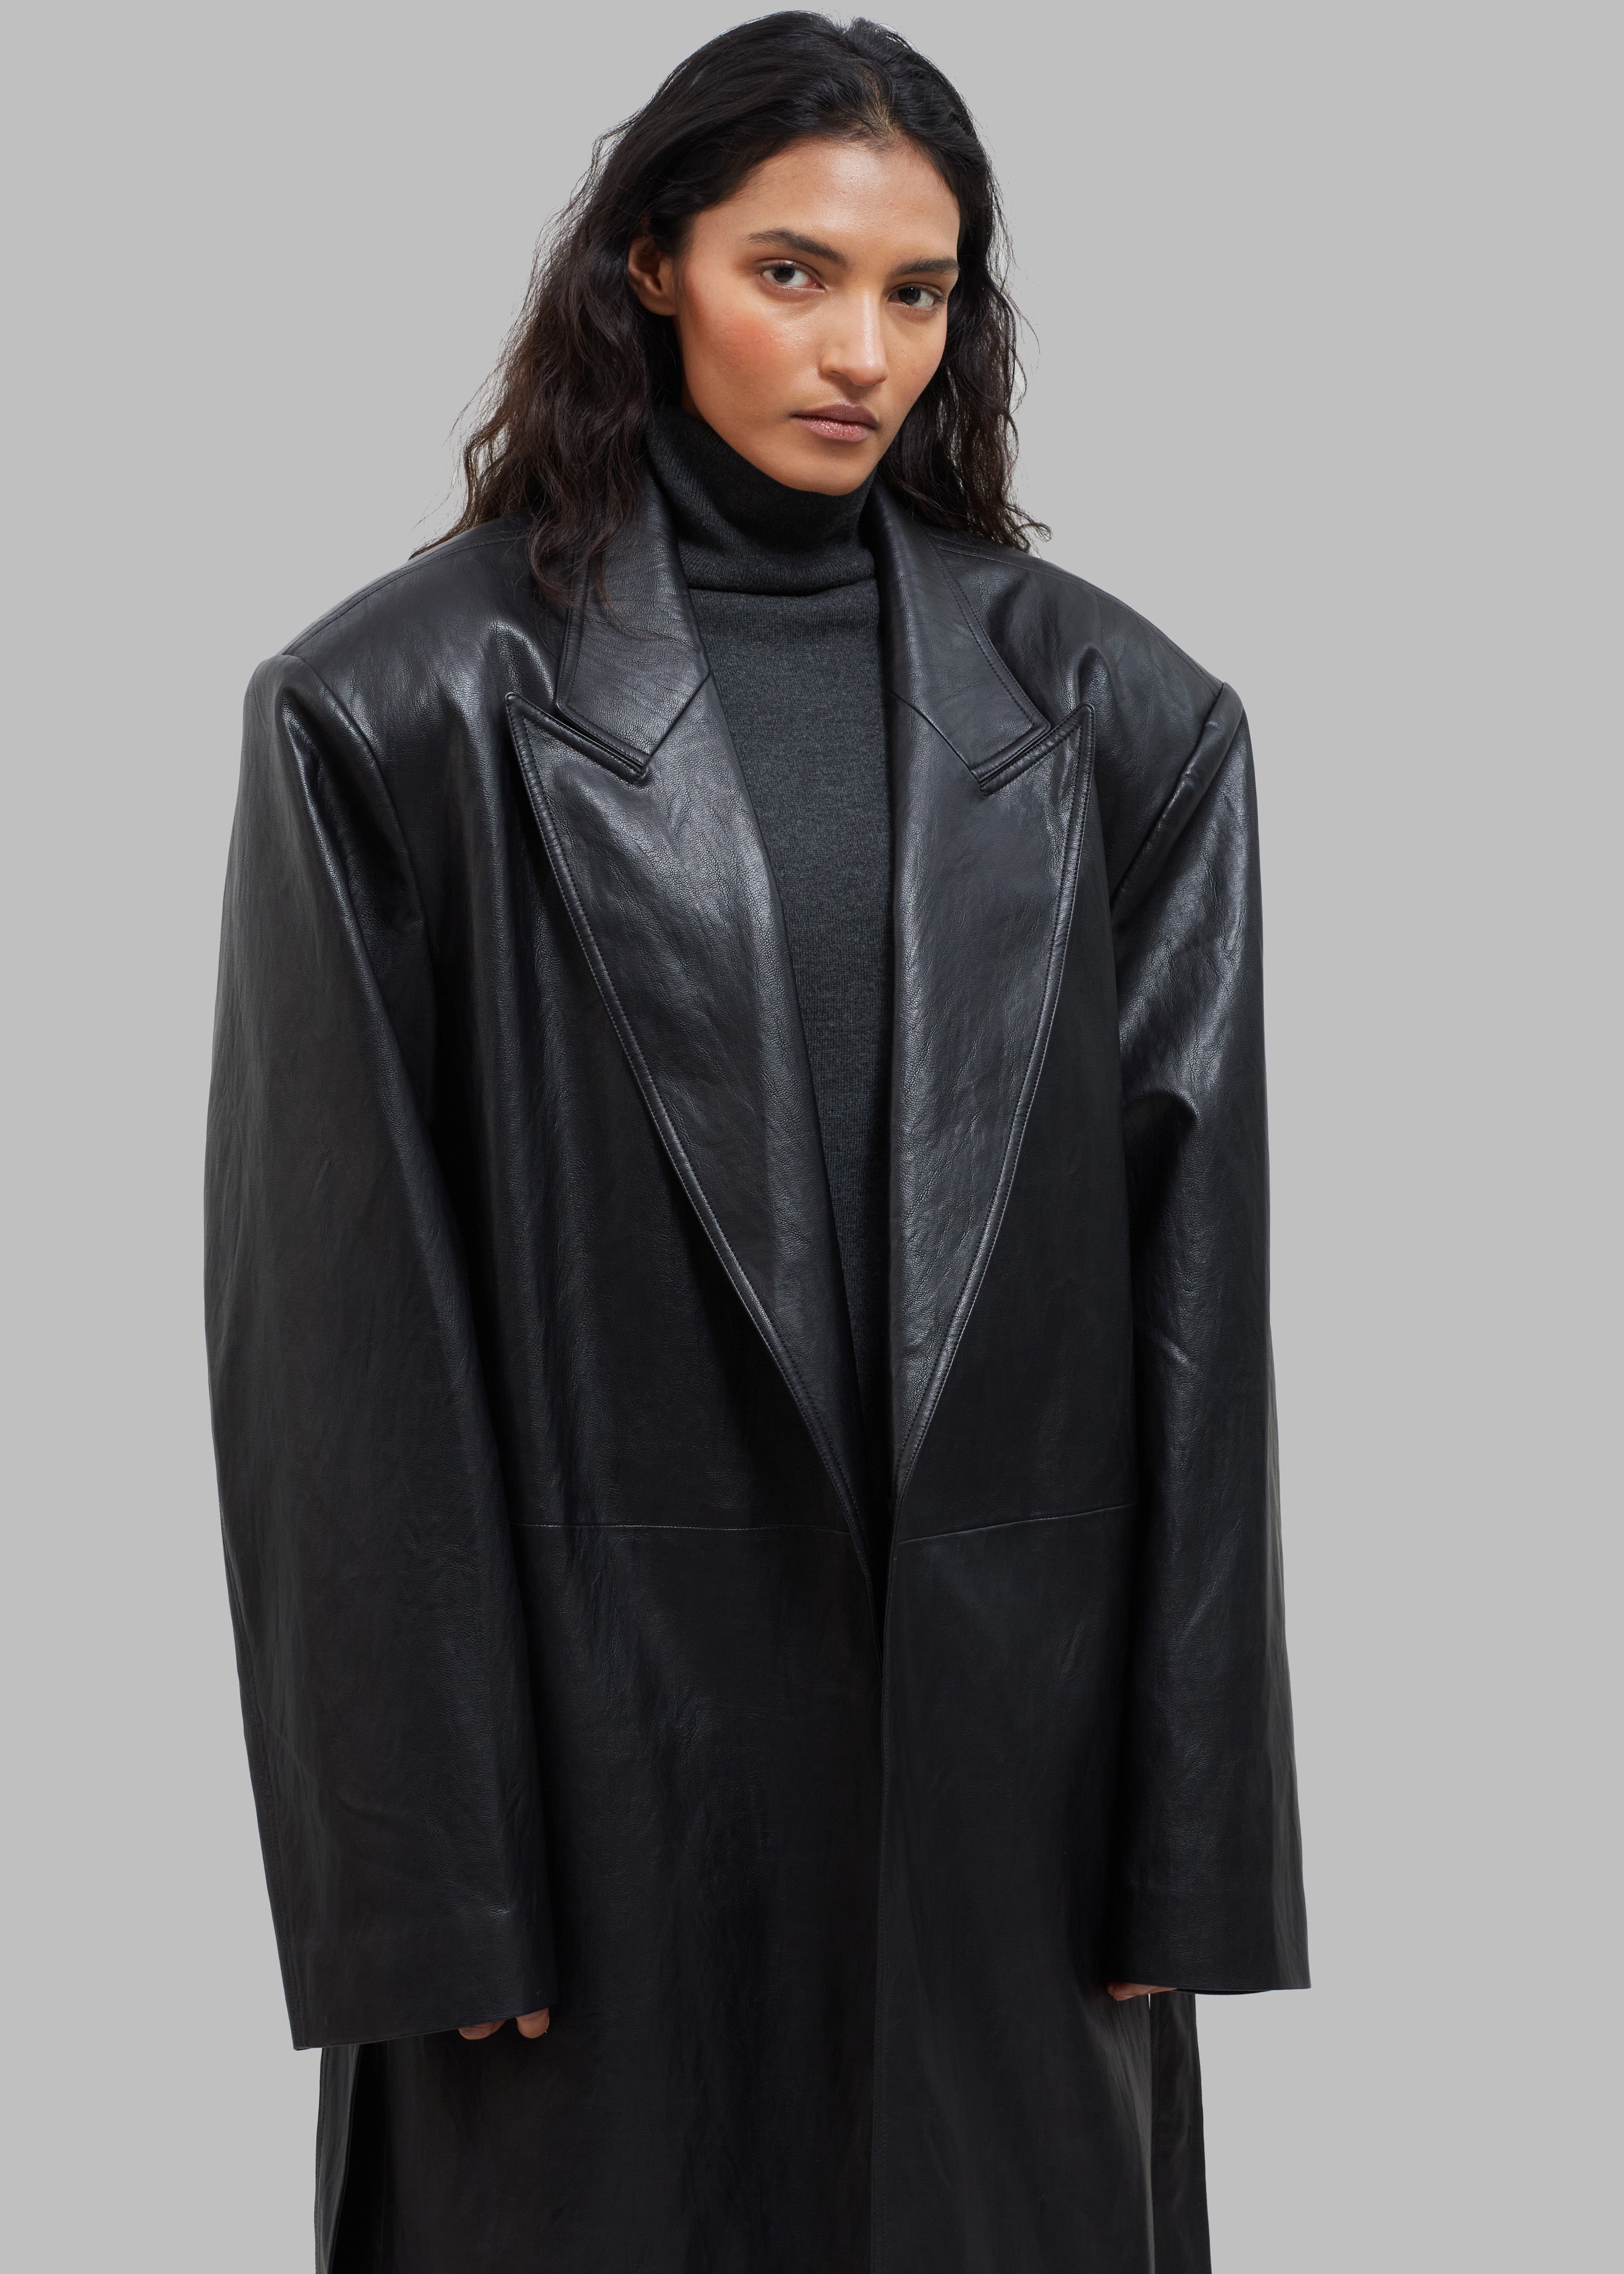 The Frankie Shop Connie Faux Leather Belted Trench Coat - Black